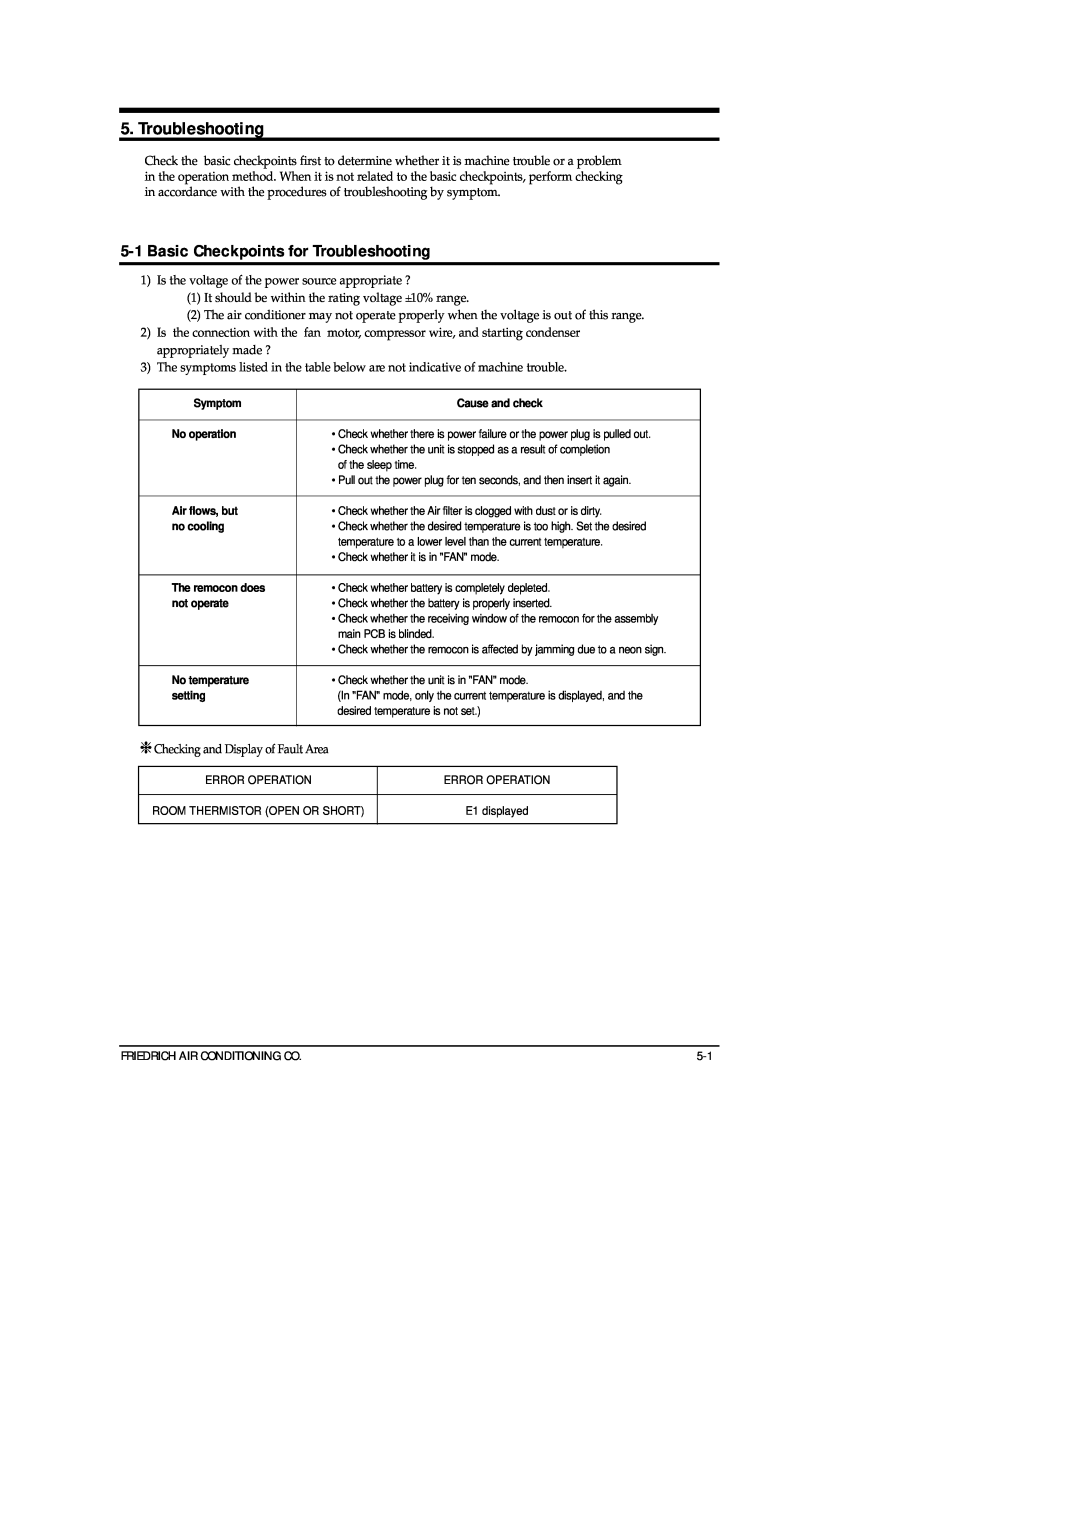 Friedrich SP05A10 service manual 5-1Basic Checkpoints for Troubleshooting, Friedrich Air Conditioning Co 